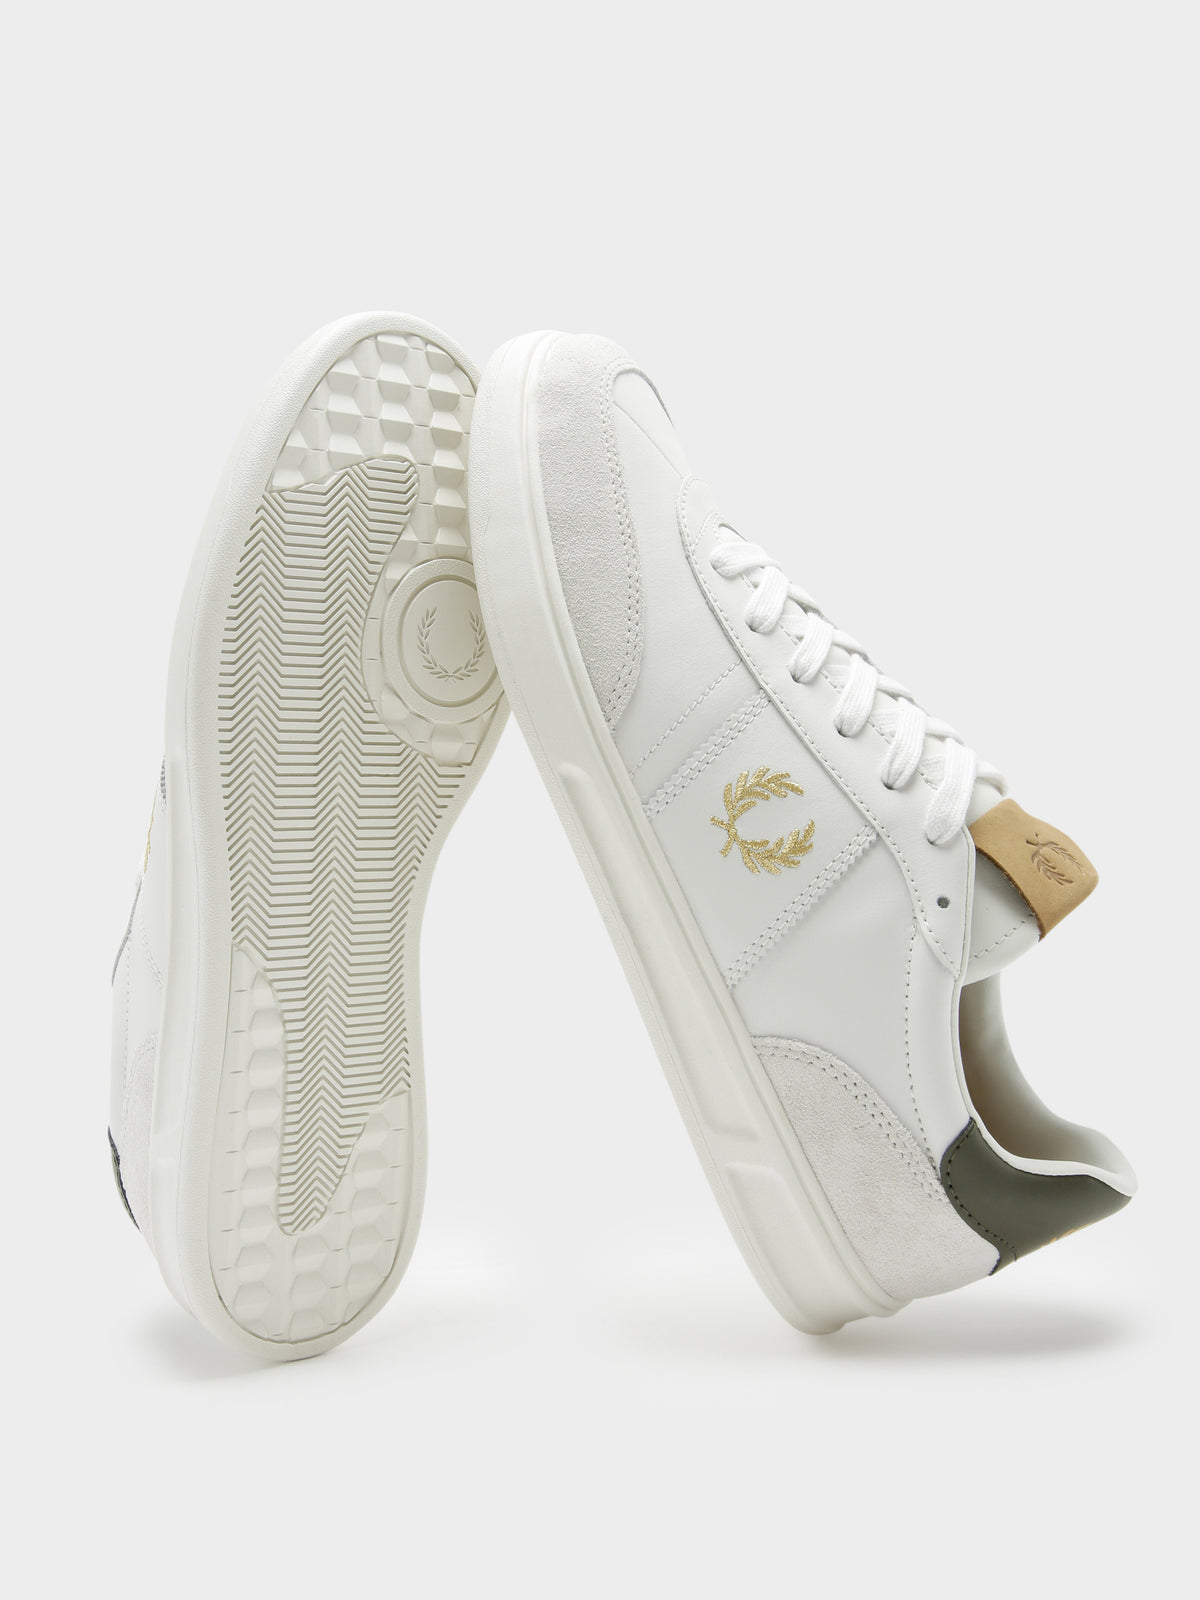 Mens B400 Leather Suede Sneakers in White, Green &amp; Gold